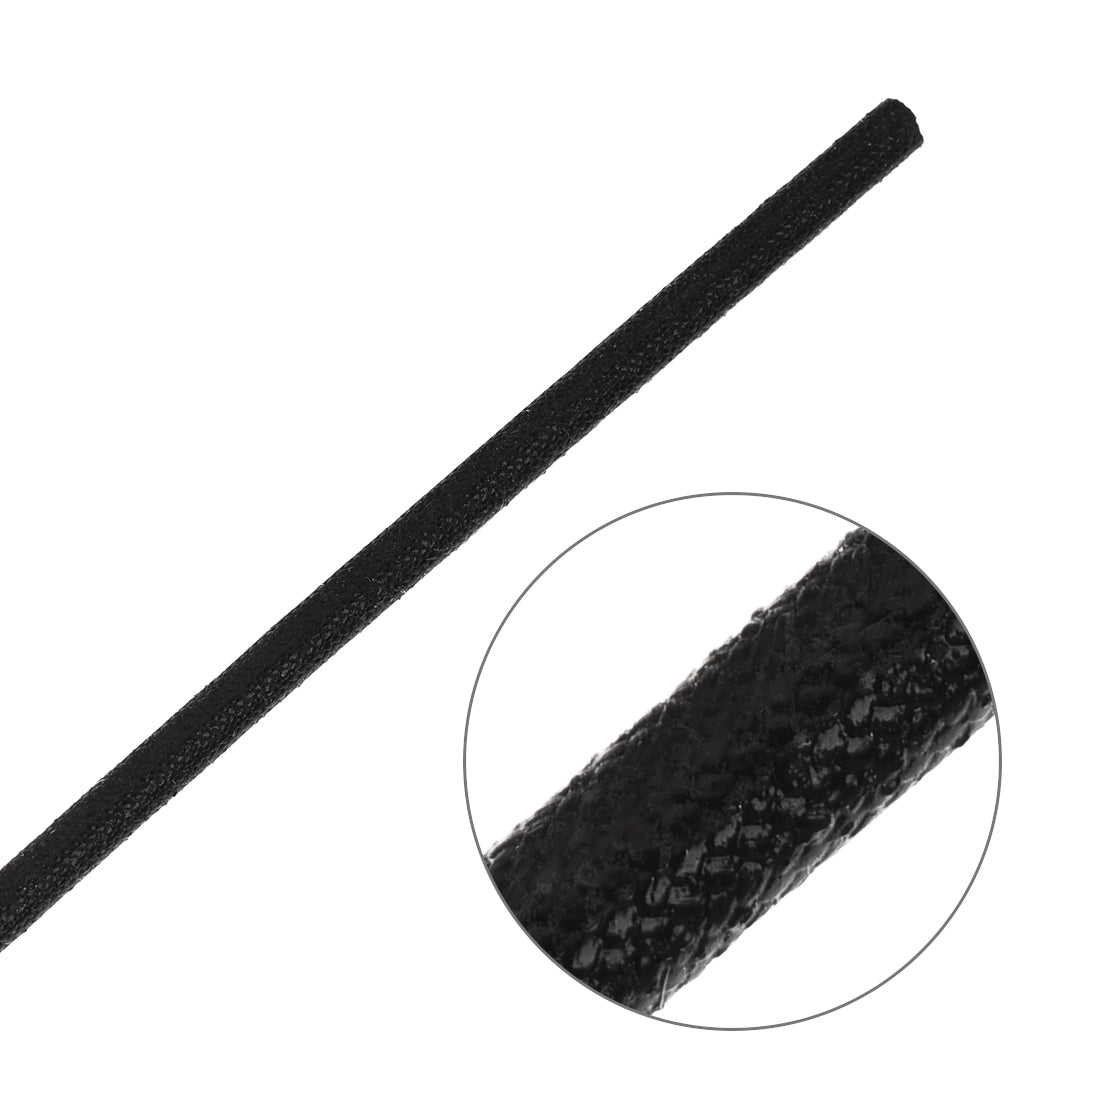 uxcell Uxcell Insulation Cable Protector,16.4Ft-2mm High TEMP Silicone Fiberglass Sleeve Black